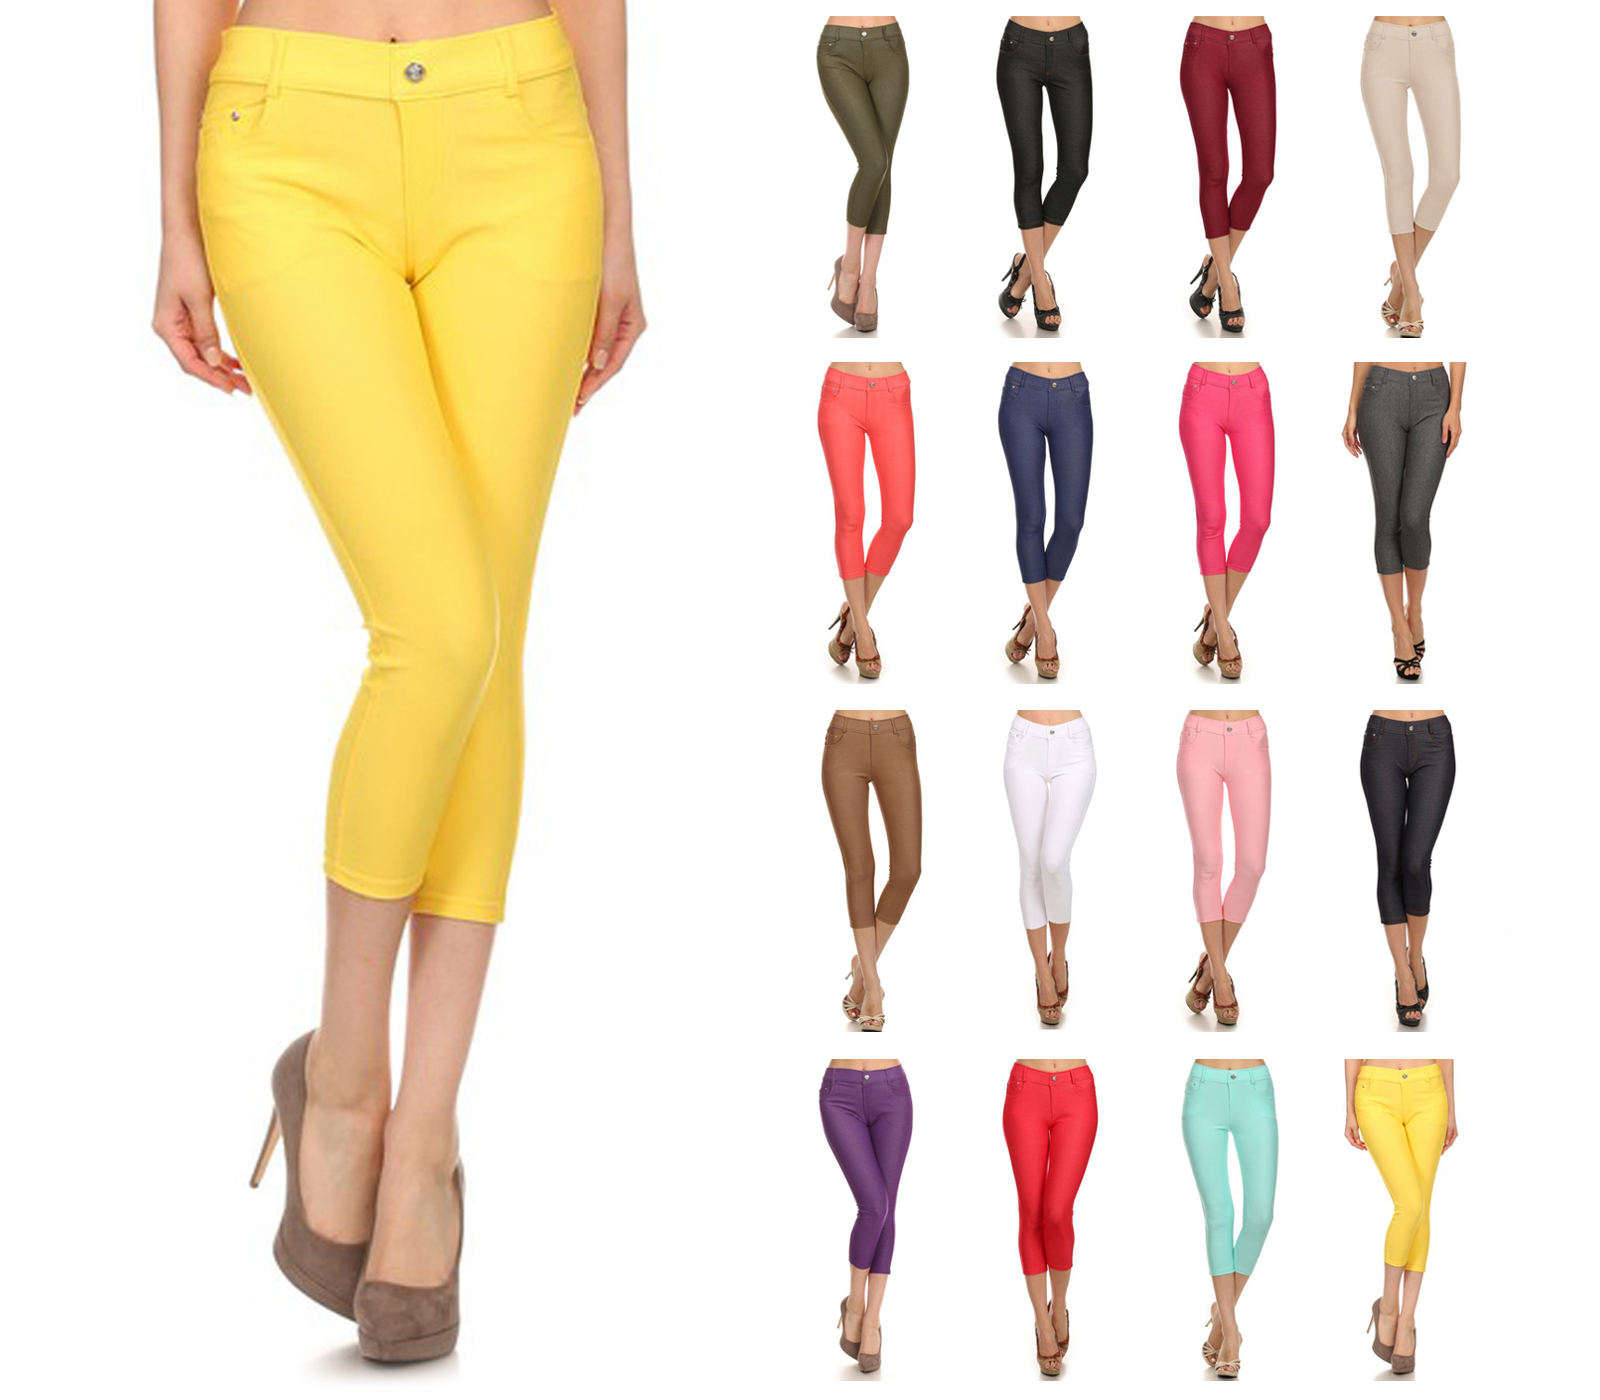 Womens Jeggings with Pockets Solid Color Capri Leggings by Belle Donne - Plus SIze Available